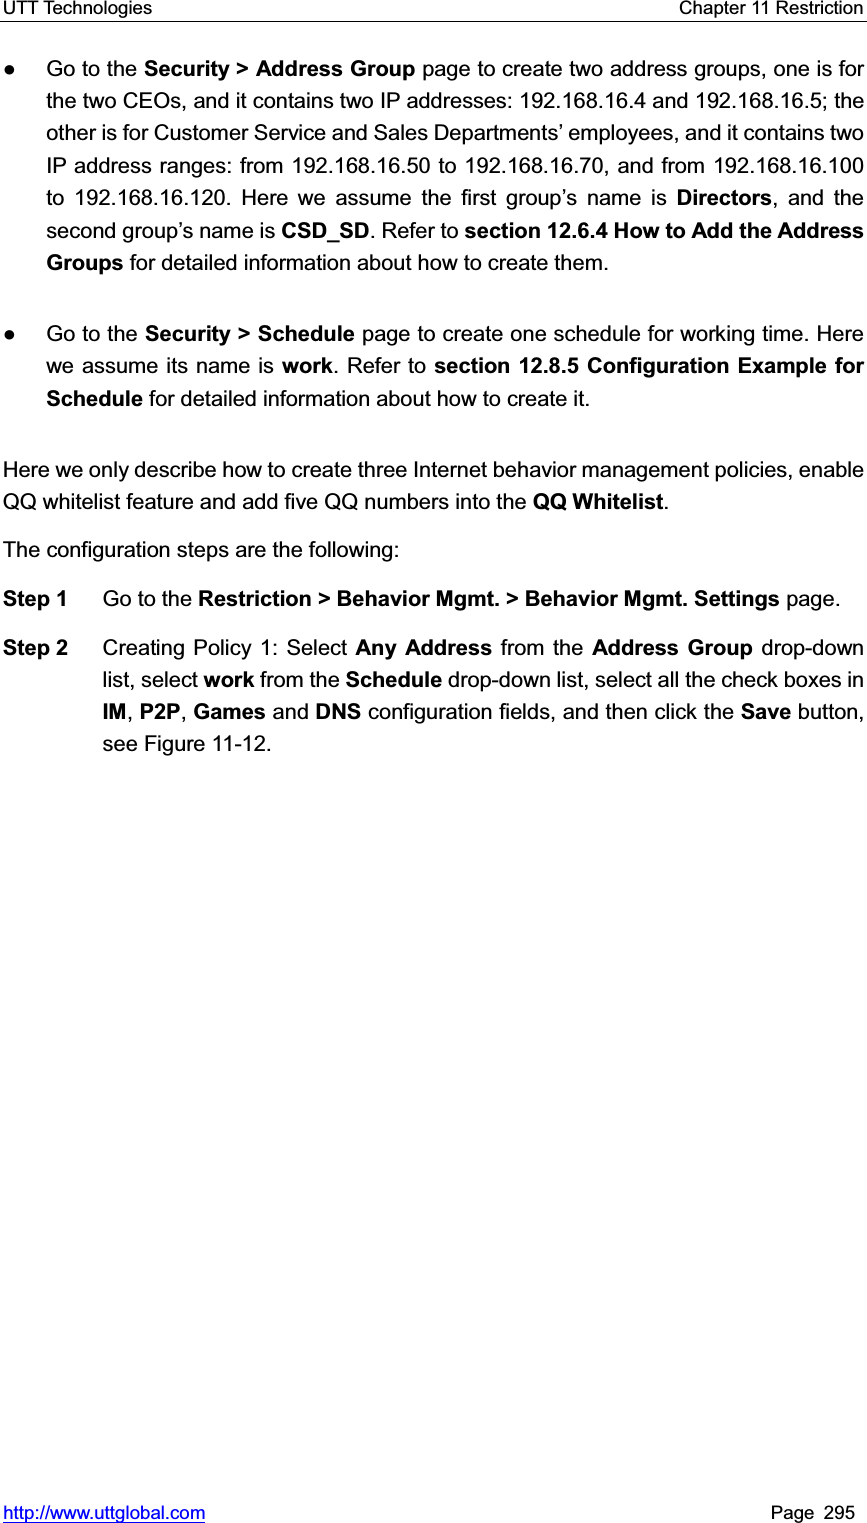 UTT Technologies    Chapter 11 Restriction   http://www.uttglobal.com Page 295 Ɣ Go to the Security &gt; Address Group page to create two address groups, one is for the two CEOs, and it contains two IP addresses: 192.168.16.4 and 192.168.16.5; the other is for Customer Service and Sales Departments¶ employees, and it contains two IP address ranges: from 192.168.16.50 to 192.168.16.70, and from 192.168.16.100 to 192.168.16.120. Here we assume the first group¶s name is Directors, and the second group¶s name is CSD_SD. Refer to section 12.6.4 How to Add the Address Groups for detailed information about how to create them. Ɣ Go to the Security &gt; Schedule page to create one schedule for working time. Here we assume its name is work. Refer to section 12.8.5 Configuration Example for Schedule for detailed information about how to create it.   Here we only describe how to create three Internet behavior management policies, enable QQ whitelist feature and add five QQ numbers into the QQ Whitelist.The configuration steps are the following:   Step 1  Go to the Restriction &gt; Behavior Mgmt. &gt; Behavior Mgmt. Settings page. Step 2  Creating Policy 1: Select Any Address from the Address Group drop-down list, select work from the Schedule drop-down list, select all the check boxes in IM,P2P,Games and DNS configuration fields, and then click the Save button, see Figure 11-12. 